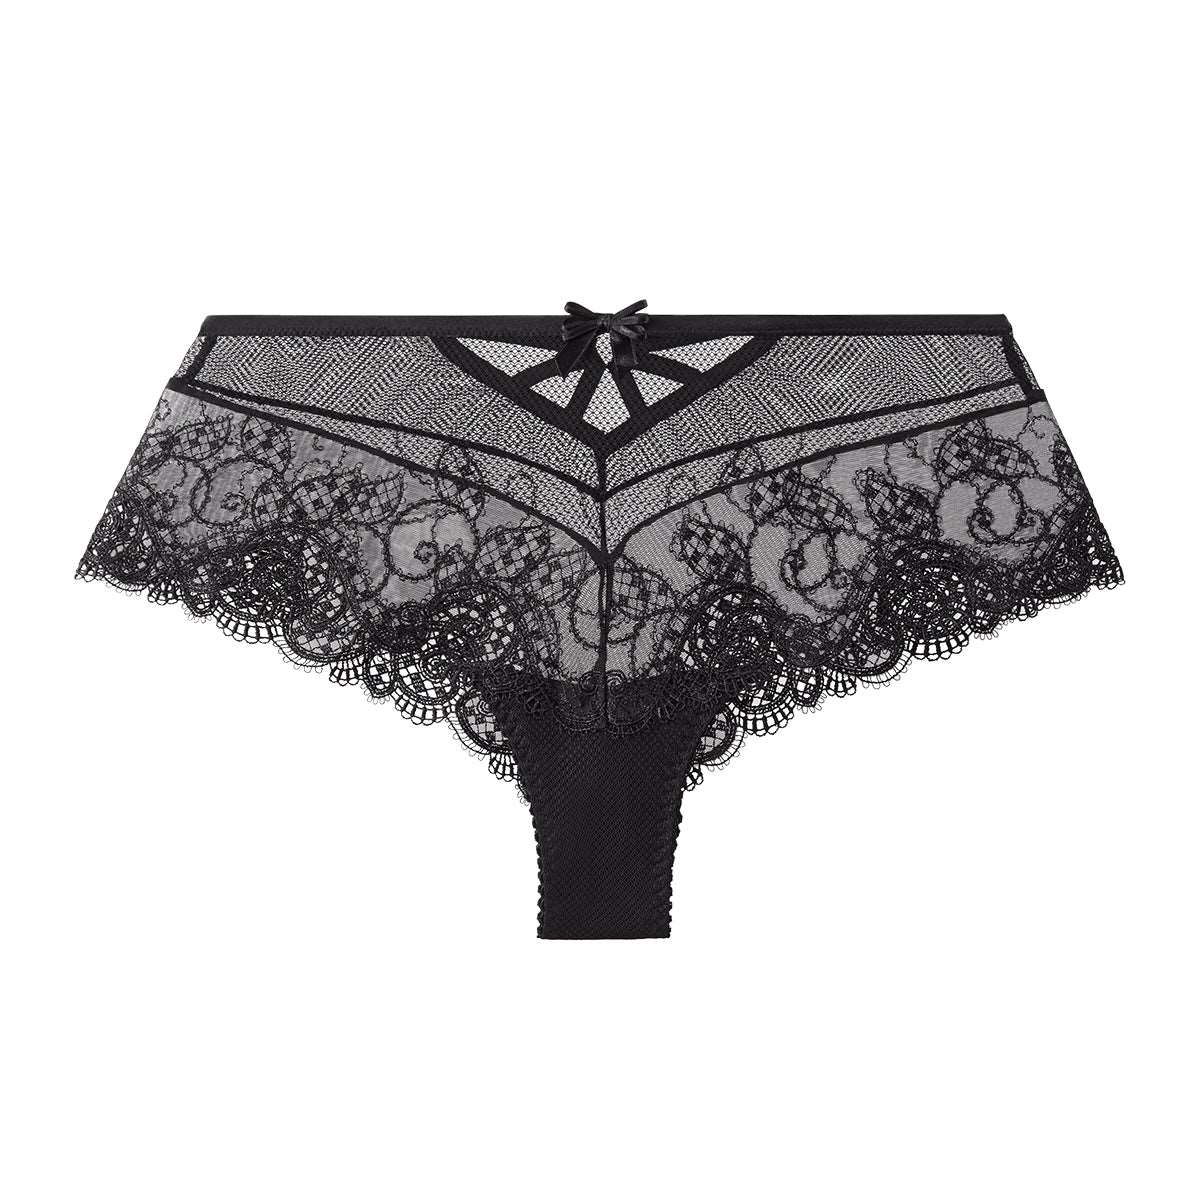 Buy Victoria's Secret Black Smooth Thong Knickers from Next Sweden